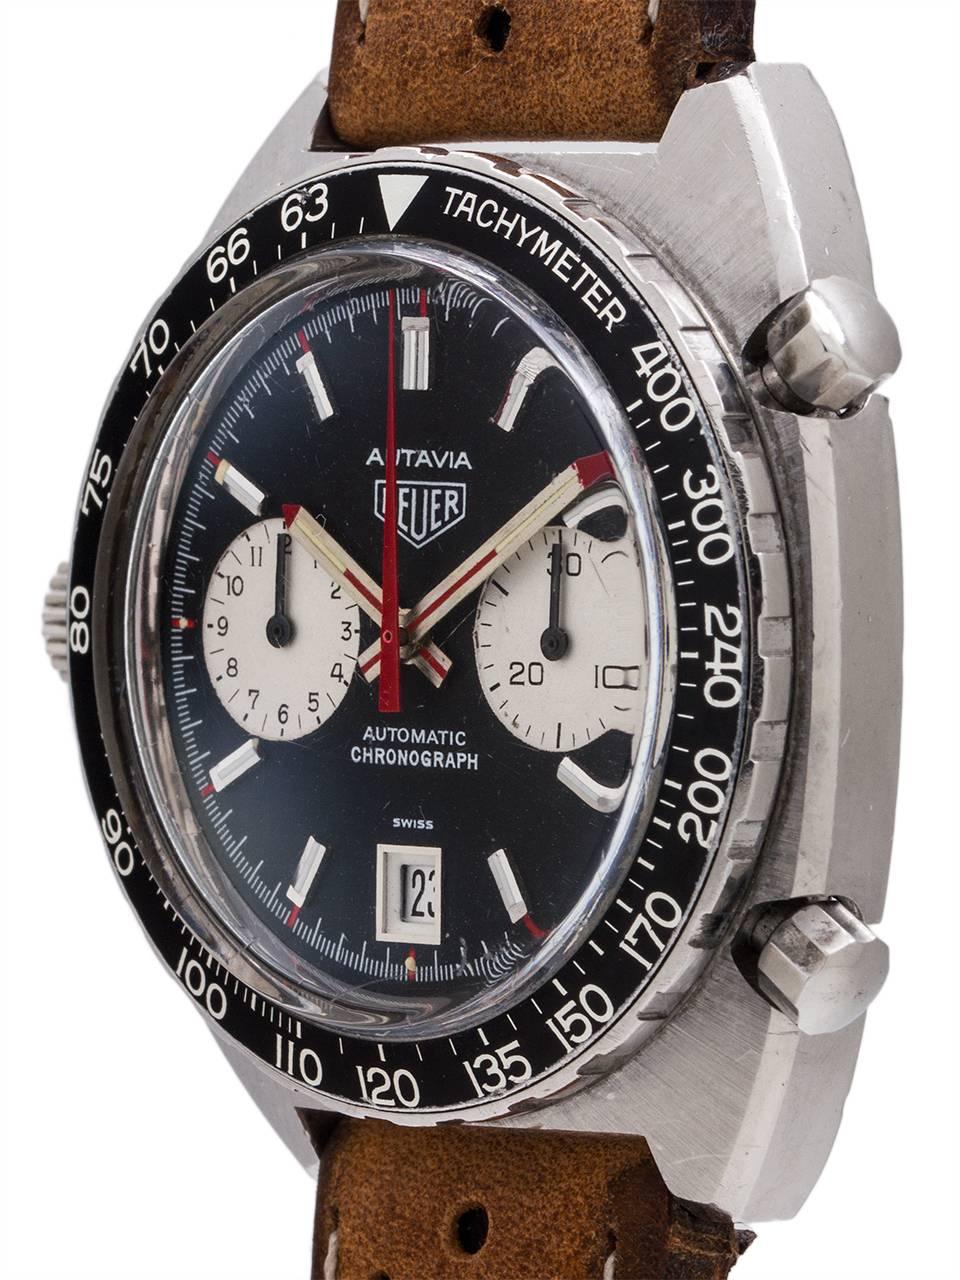 
Heuer Stainless Steel Autavia ref 1163V “Viceroy” model circa 1970. 2 registers automatic Cal 12 movement with setting at 9 0’clock. Great condition example with very sharp condition case, bezel and original dial and hands. Shown on high quality